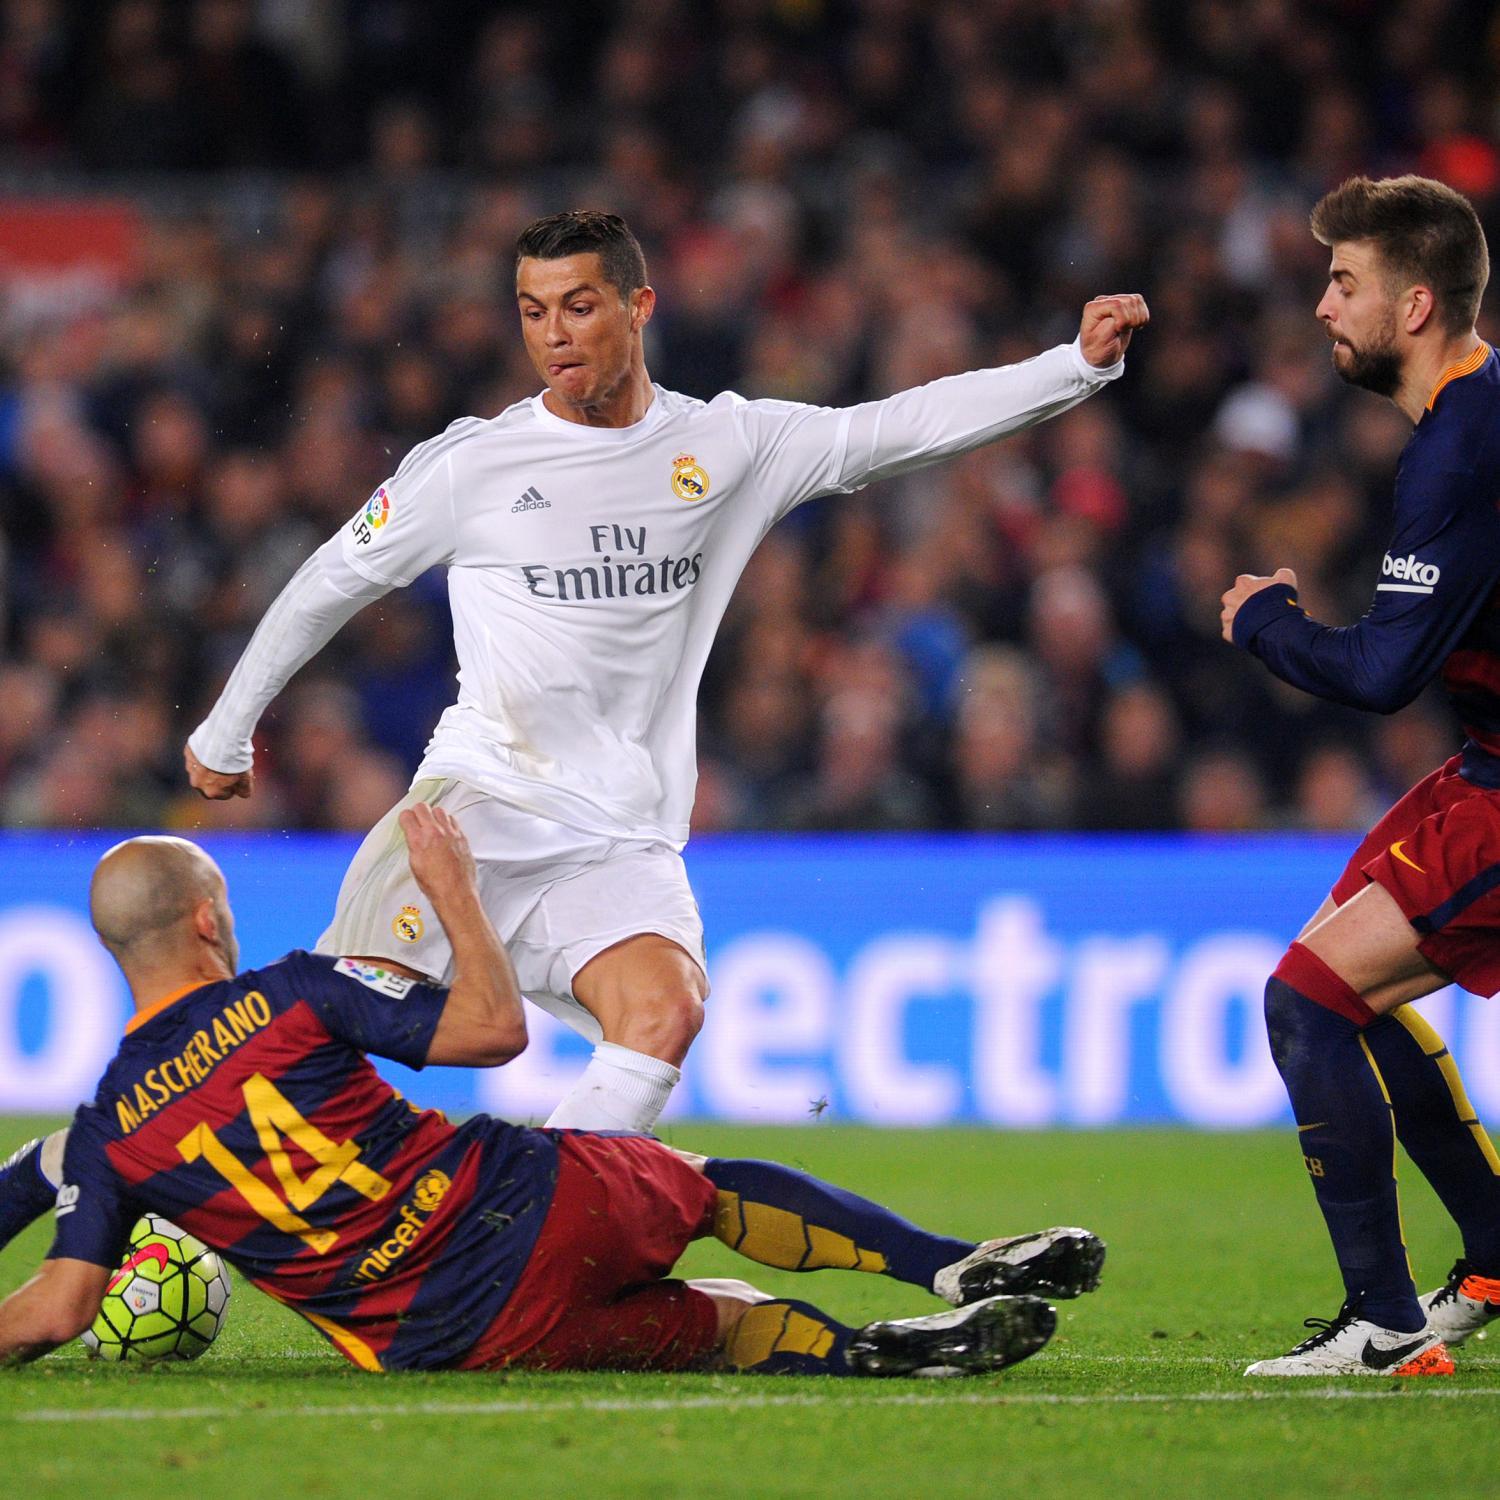 Lionel Messi vs. Cristiano Ronaldo: Updated Records, Stats After